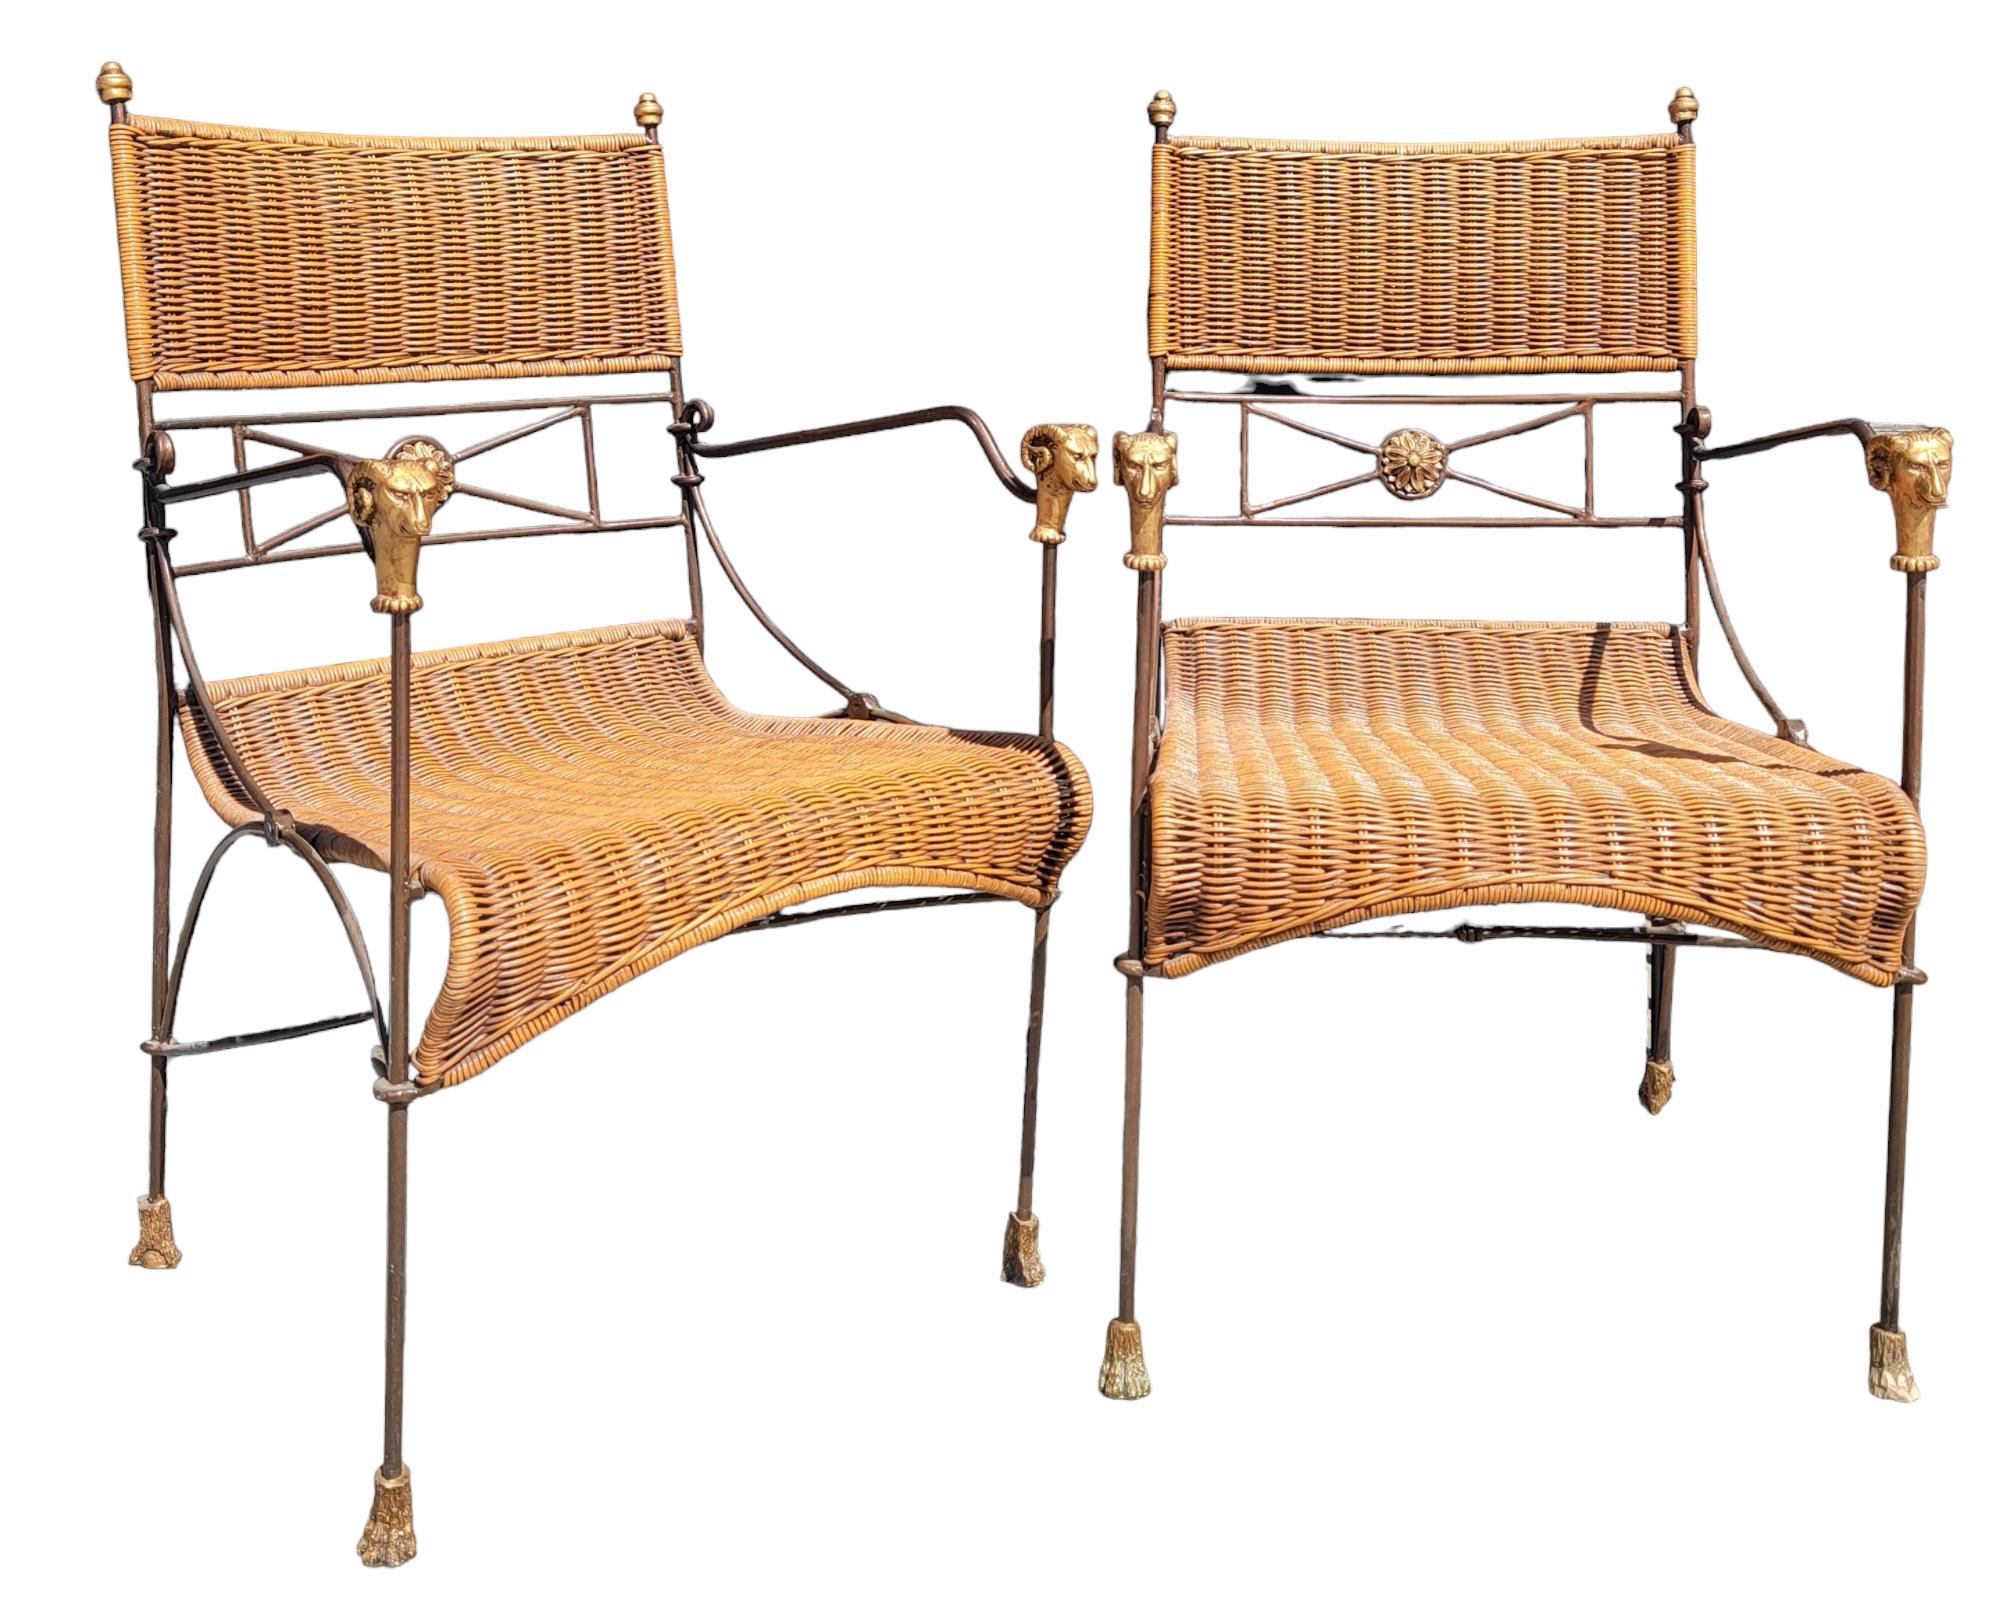 Set of Three Iron And Wicker Settee And Chair By Giacometti  For Sale 2